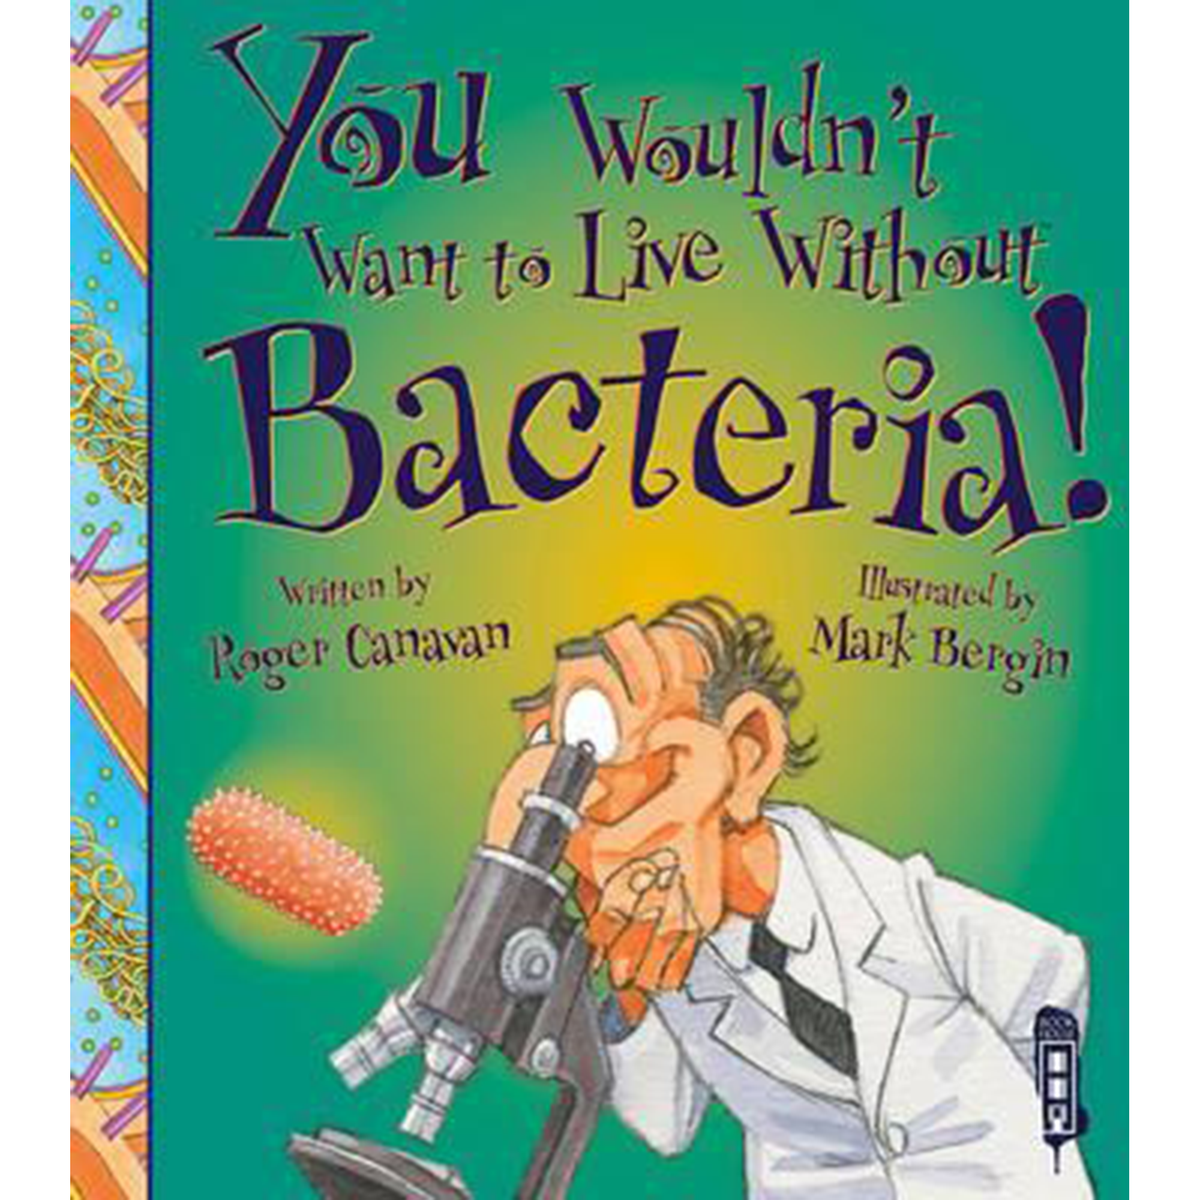 You Wouldn't Want To Live Without Bacteria!